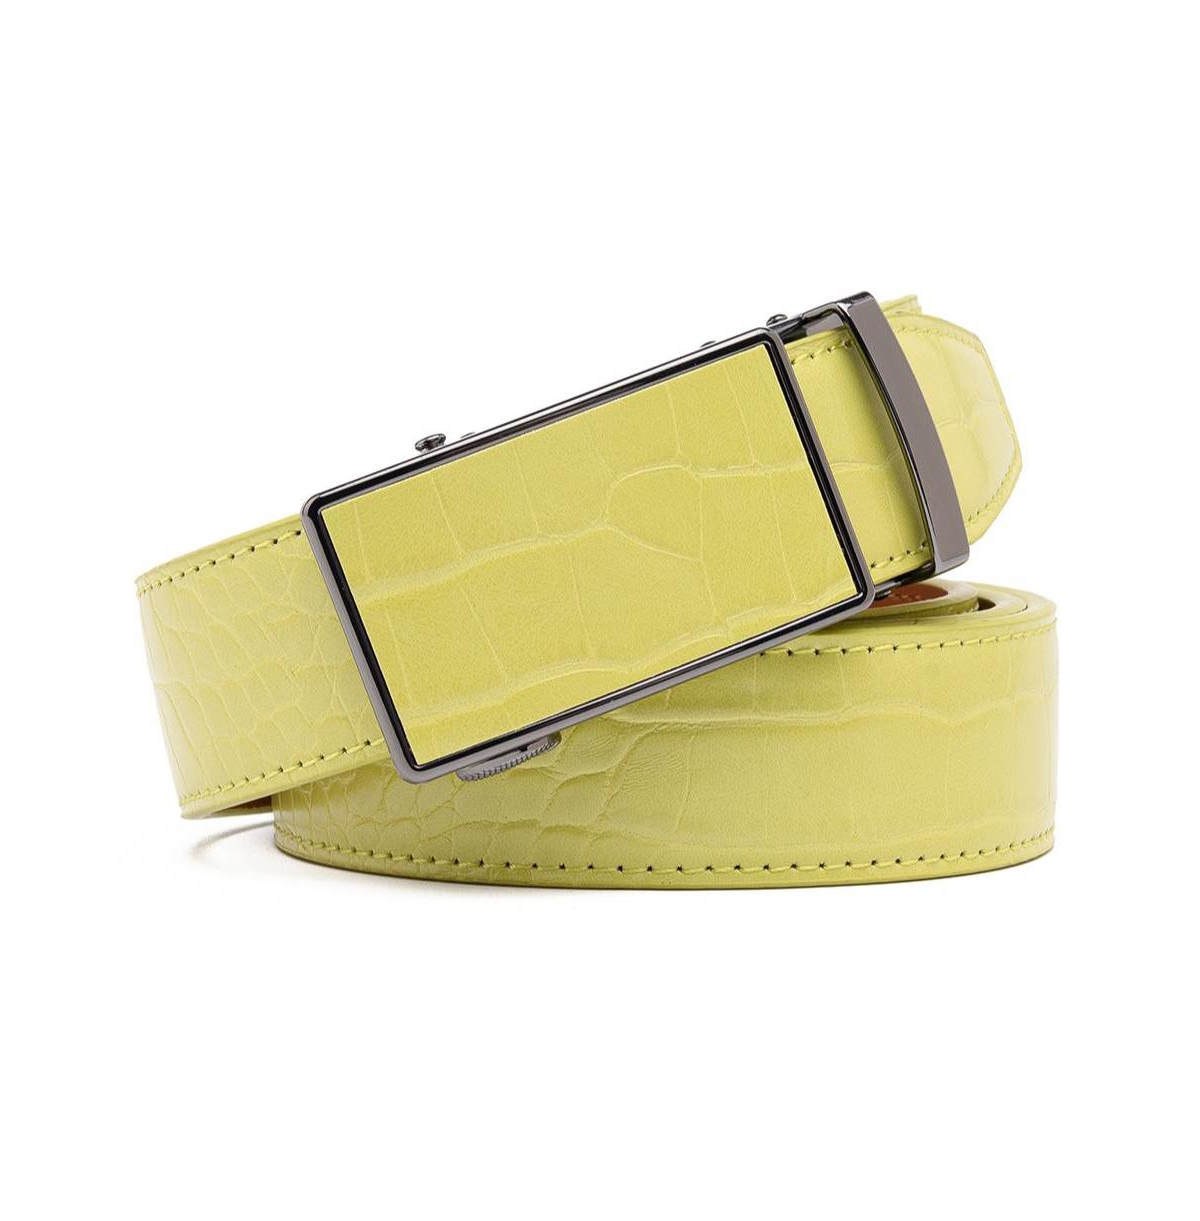 Men's Genuine Leather Crocodile Design Dress Belt with Automatic Buckle - Yellow